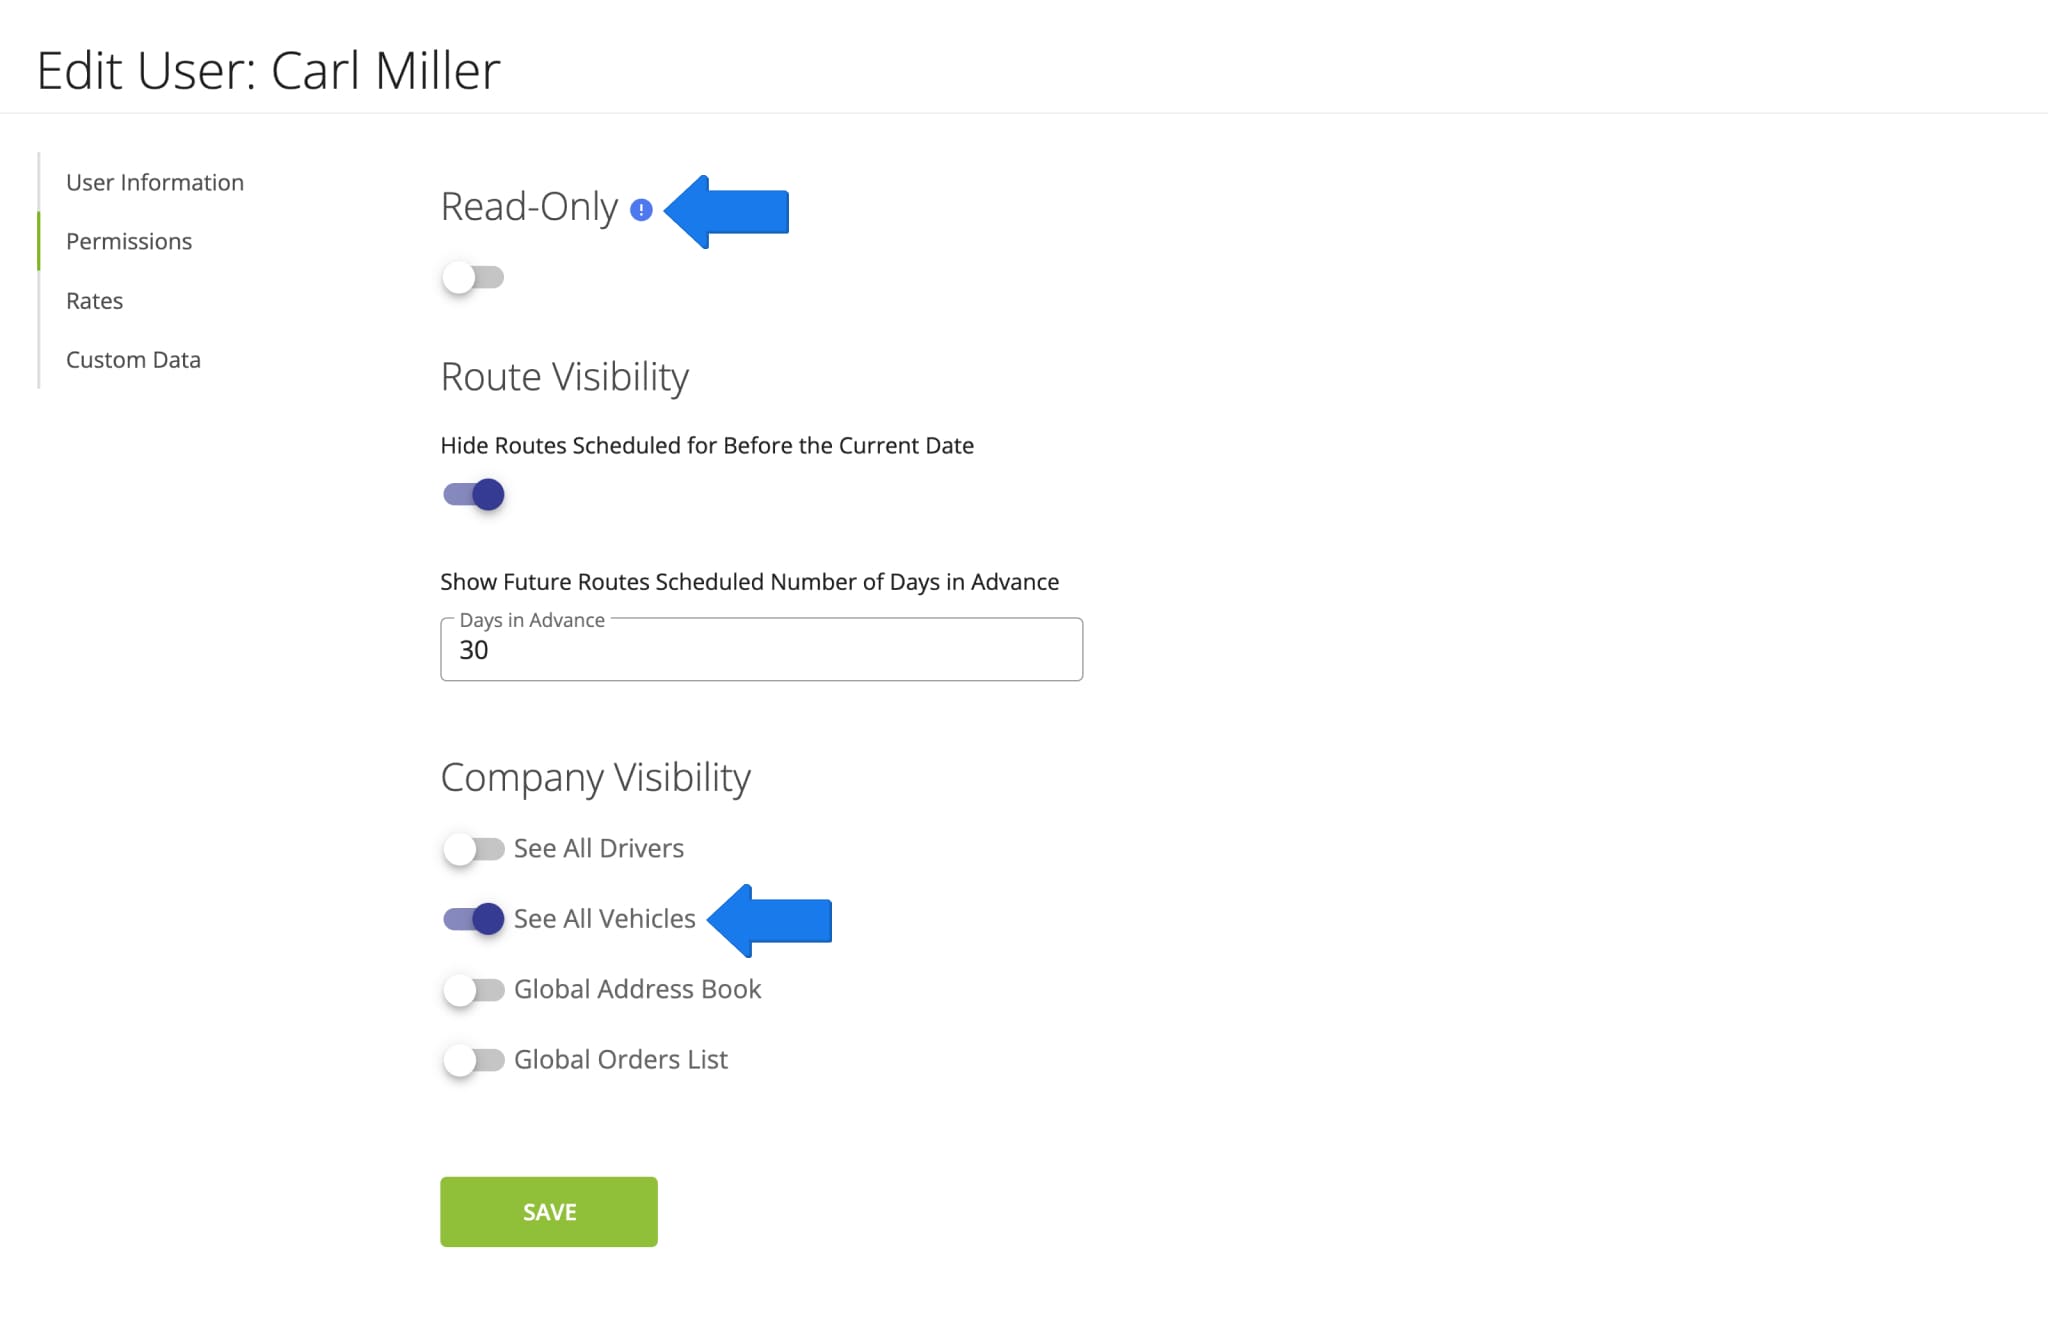 Depending on a user's account-level permissions, they can access and manage different vehicles.